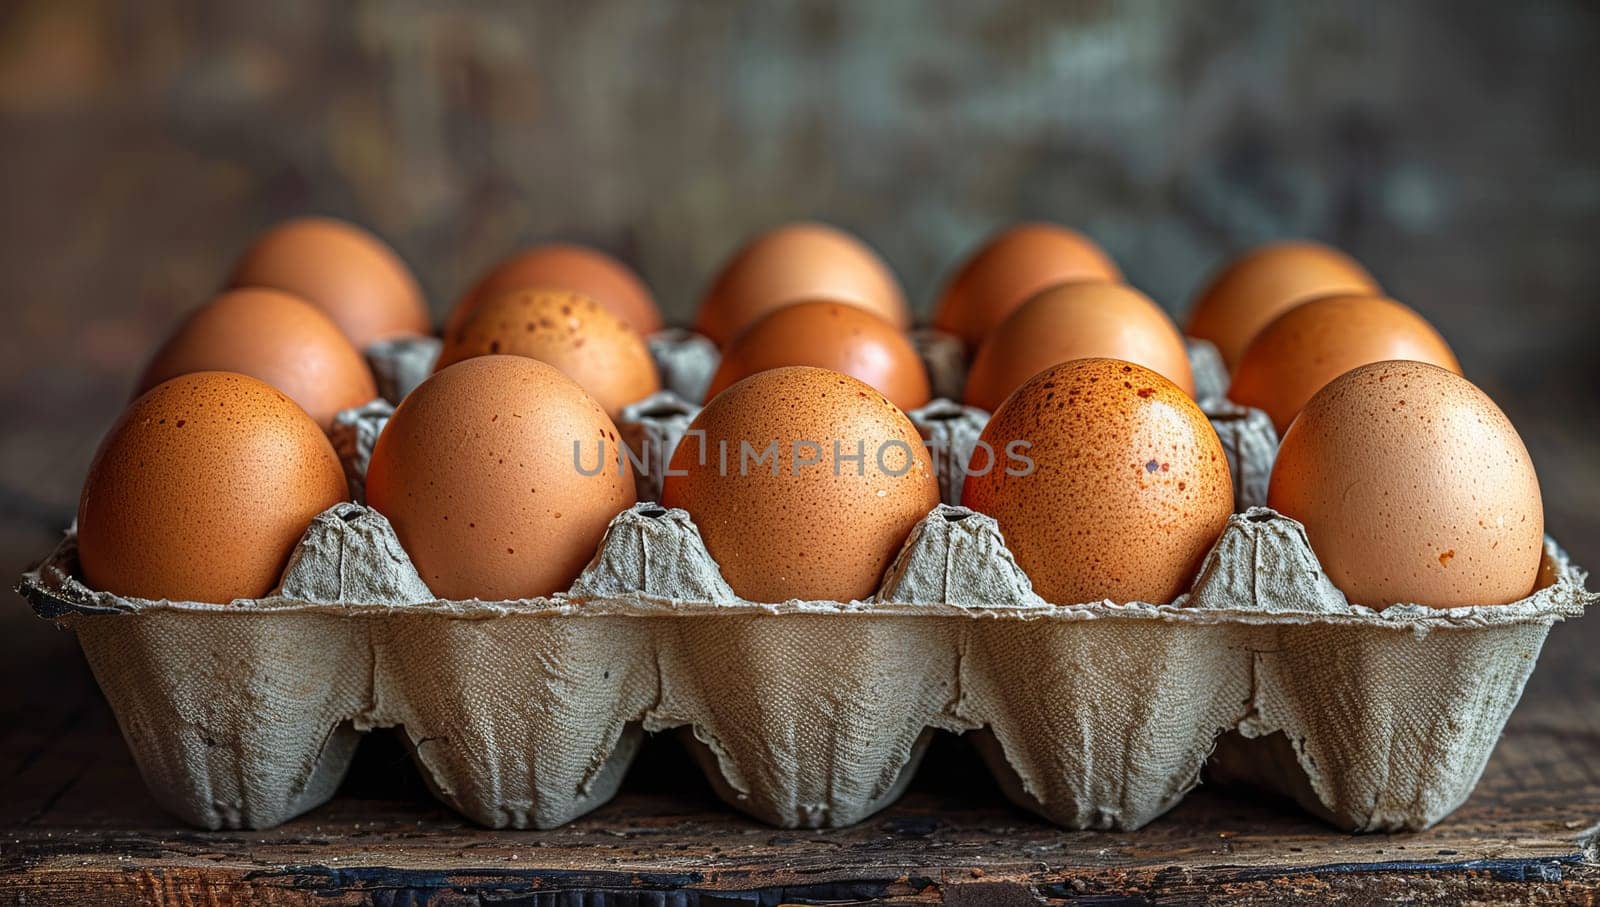 Carton of fresh eggs on a rustic wooden table by ailike